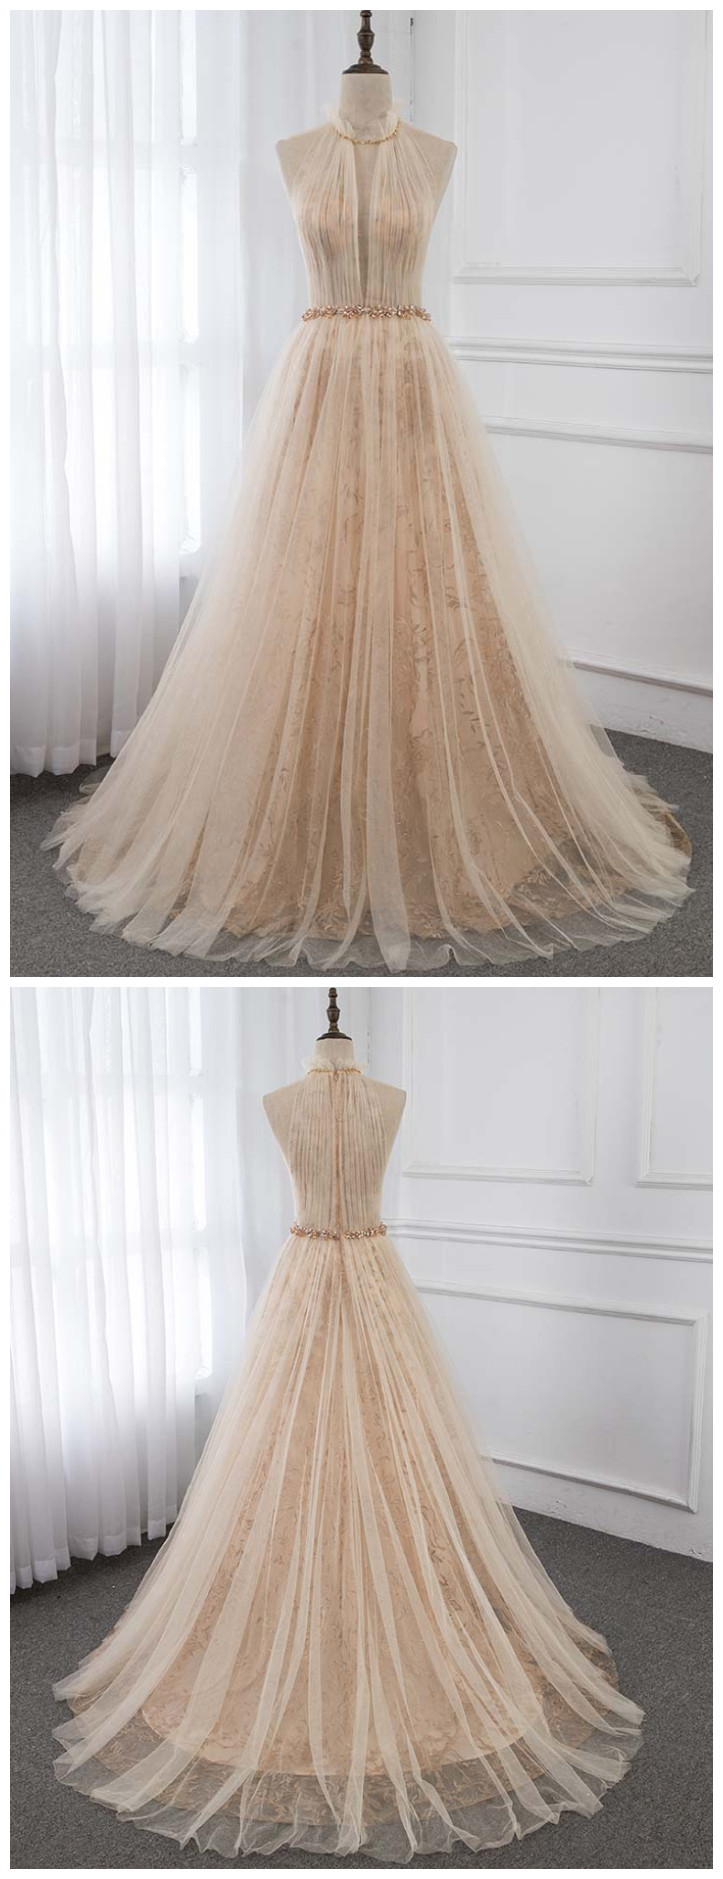 Fashion Lux Elegant Champagne Embroidery Evening Dresses Long High Neck Tulle Formal Evening Gown